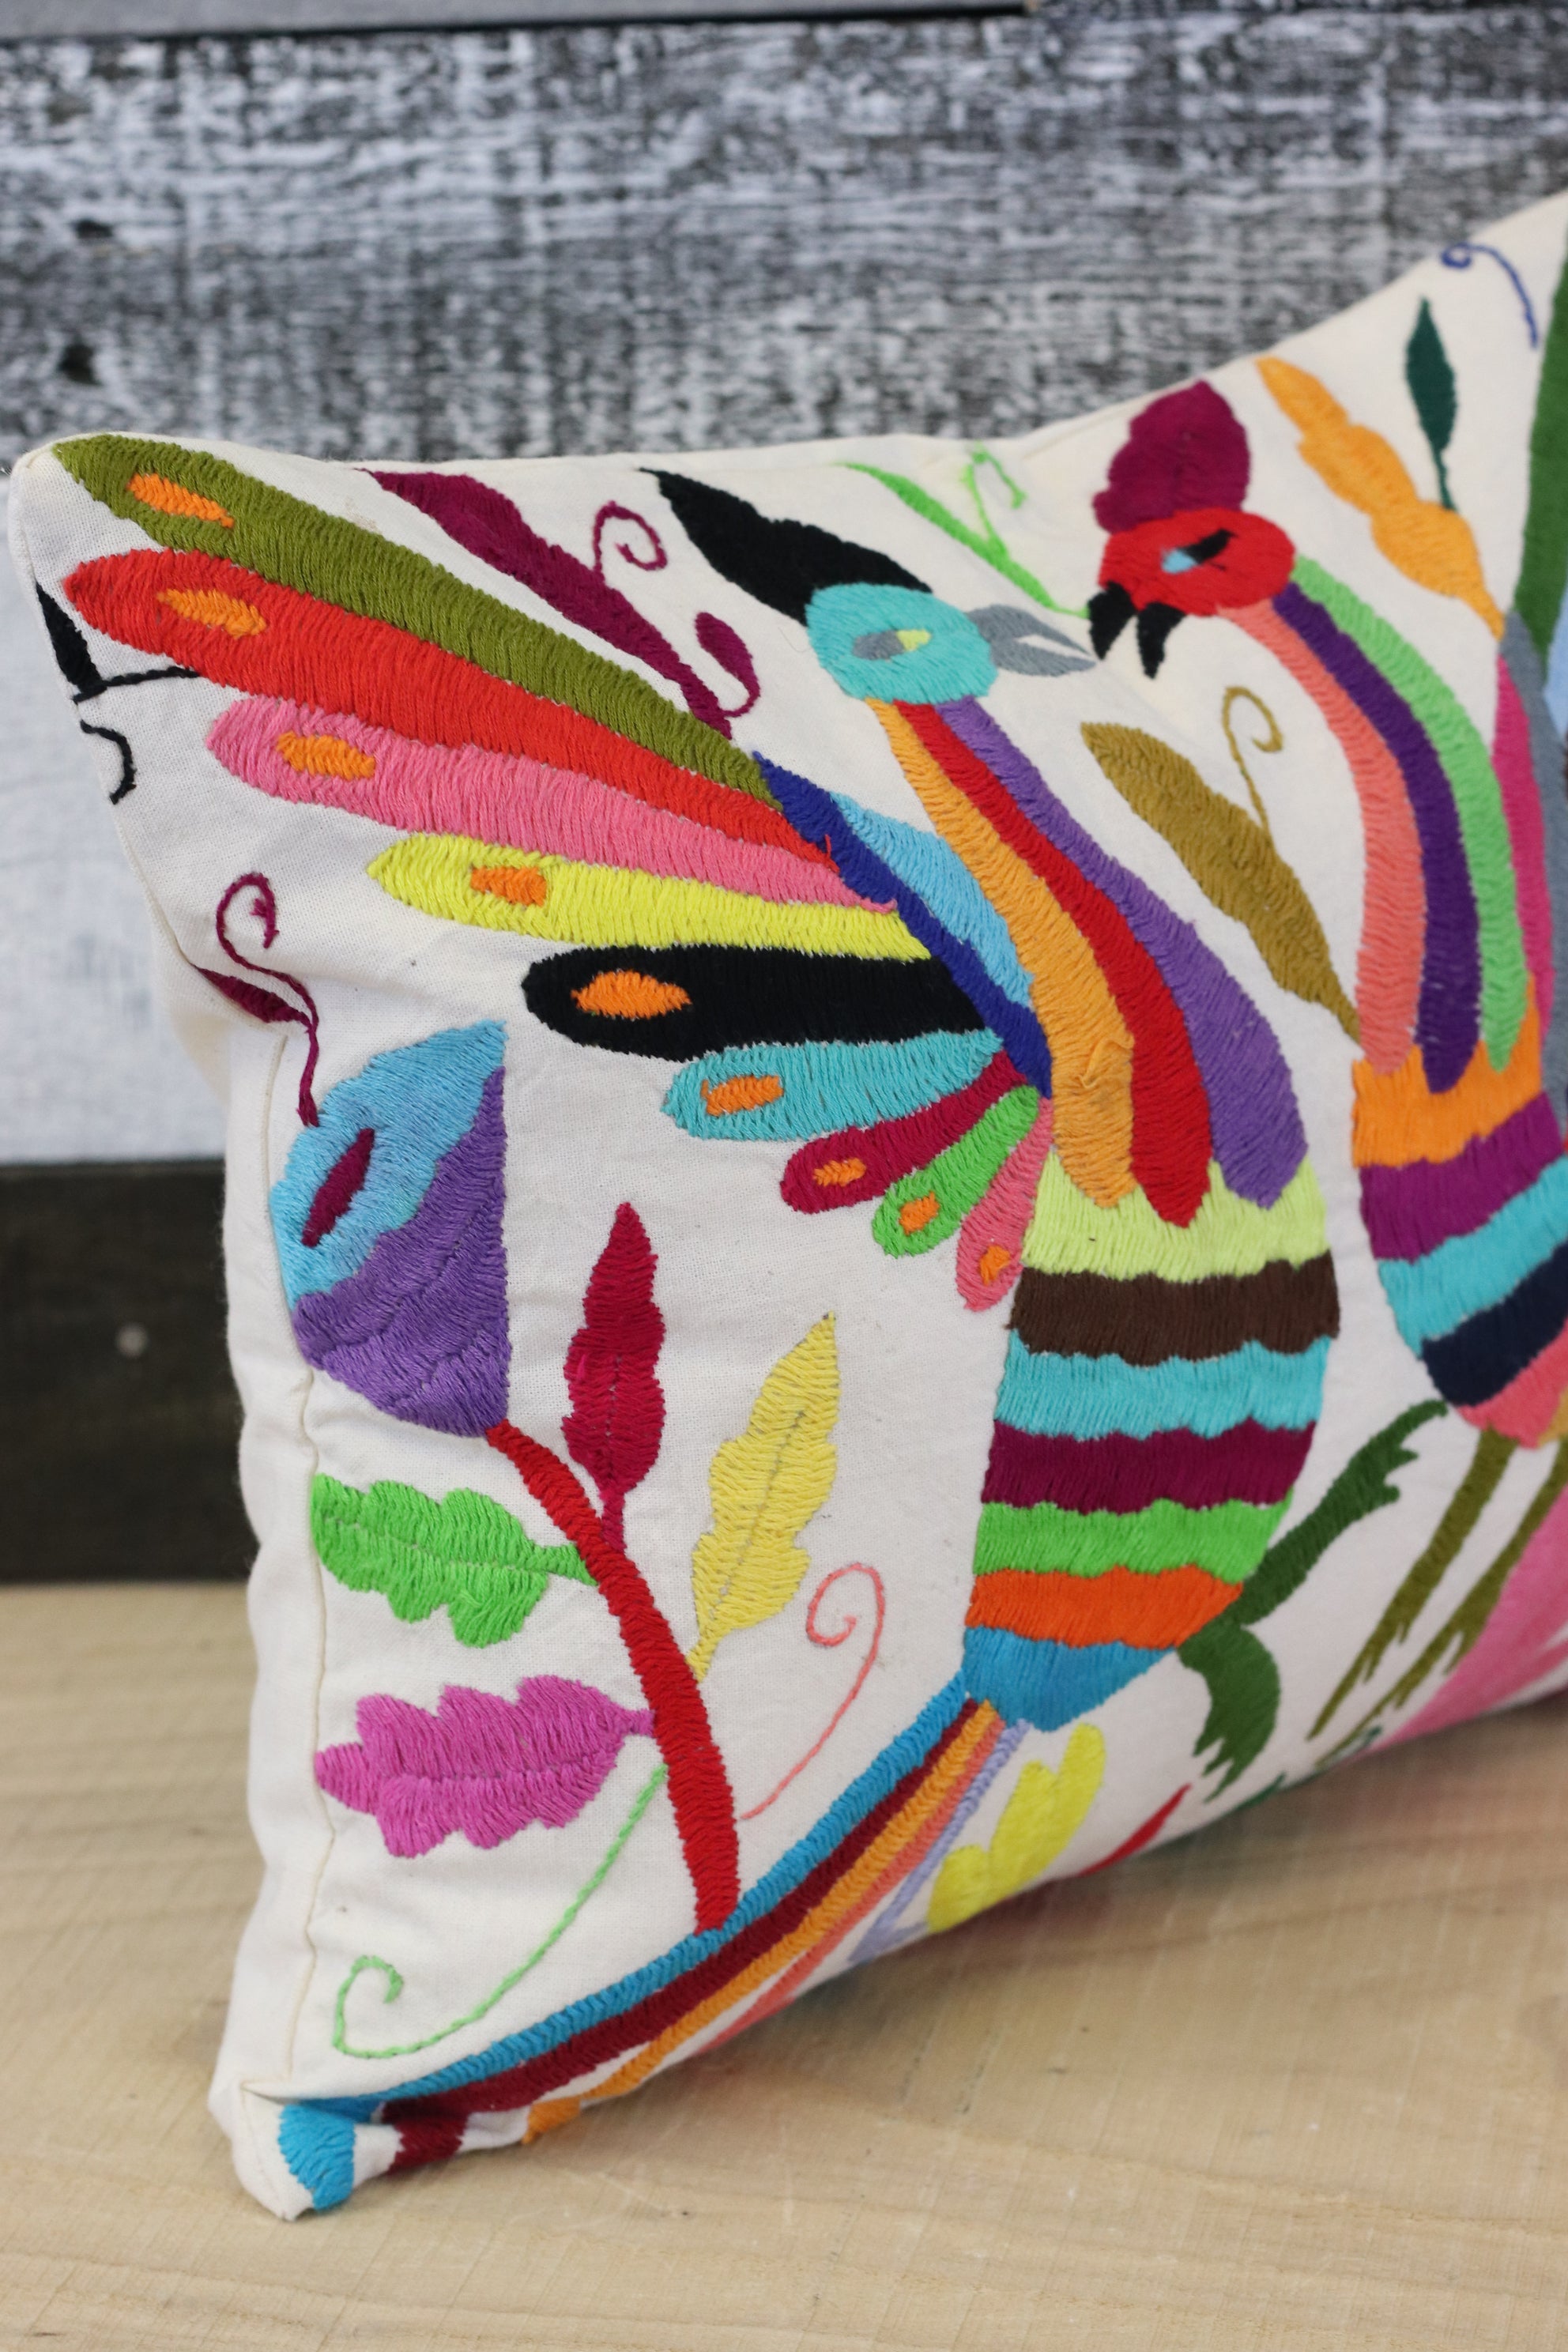 Rectangle Otomi Tenango Pillow Cover with Hand Embroidered Birds, Flowers, and Animals in Vibrant Colors. Handmade in Mexico. Ships from the USA. Buy now at www.felipeandgrace.com.